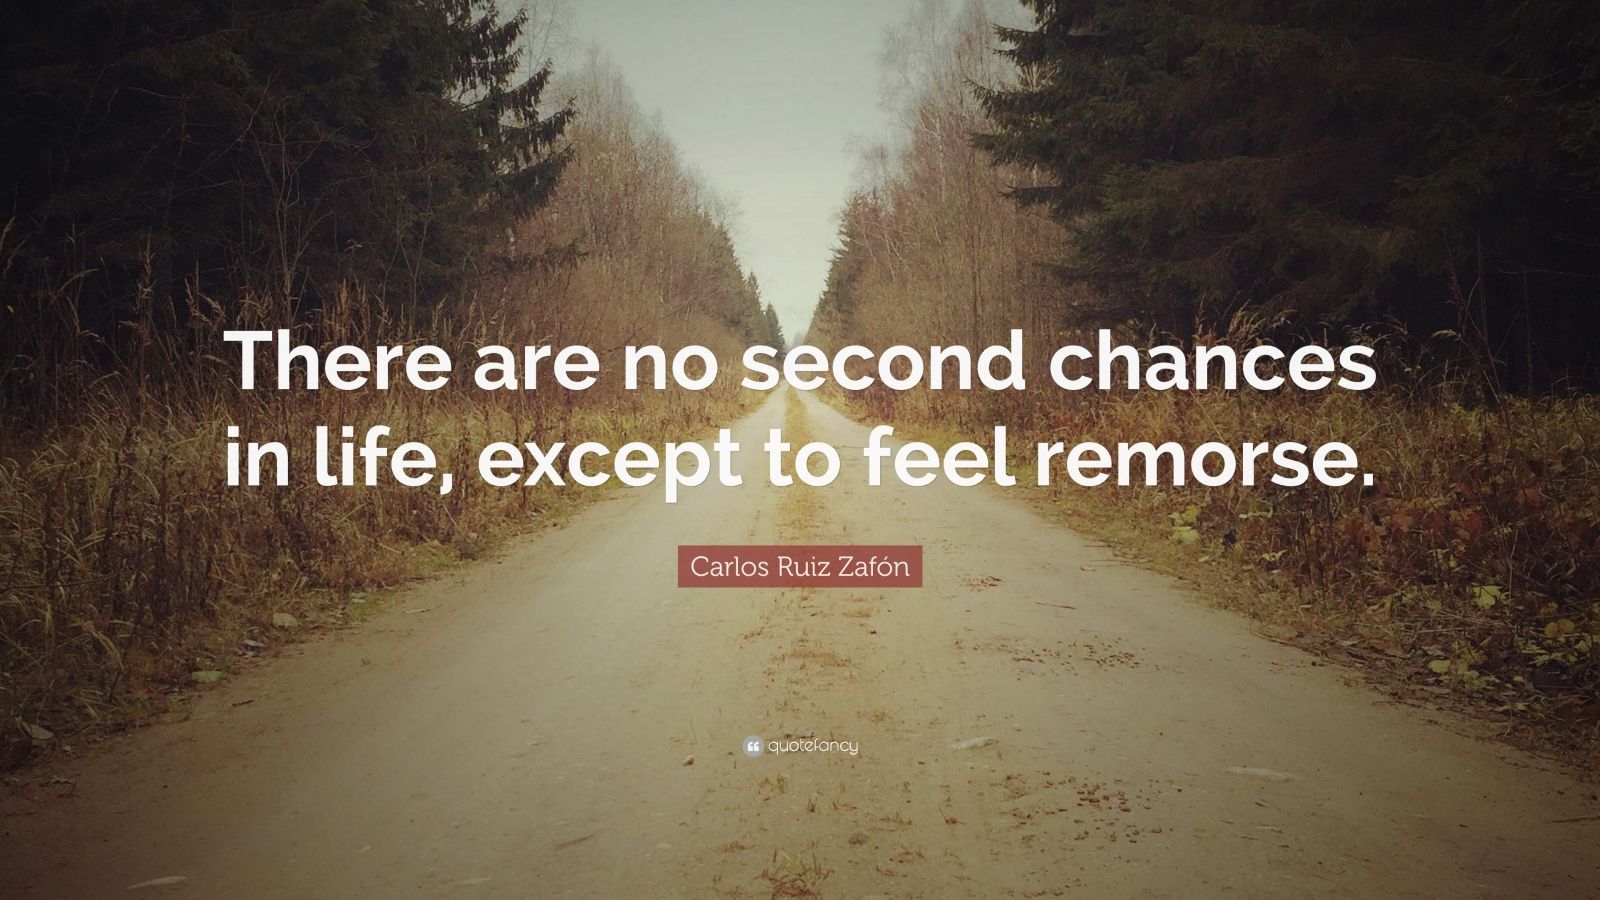 Carlos Ruiz Zafón Quote: “There are no second chances in life, except ...